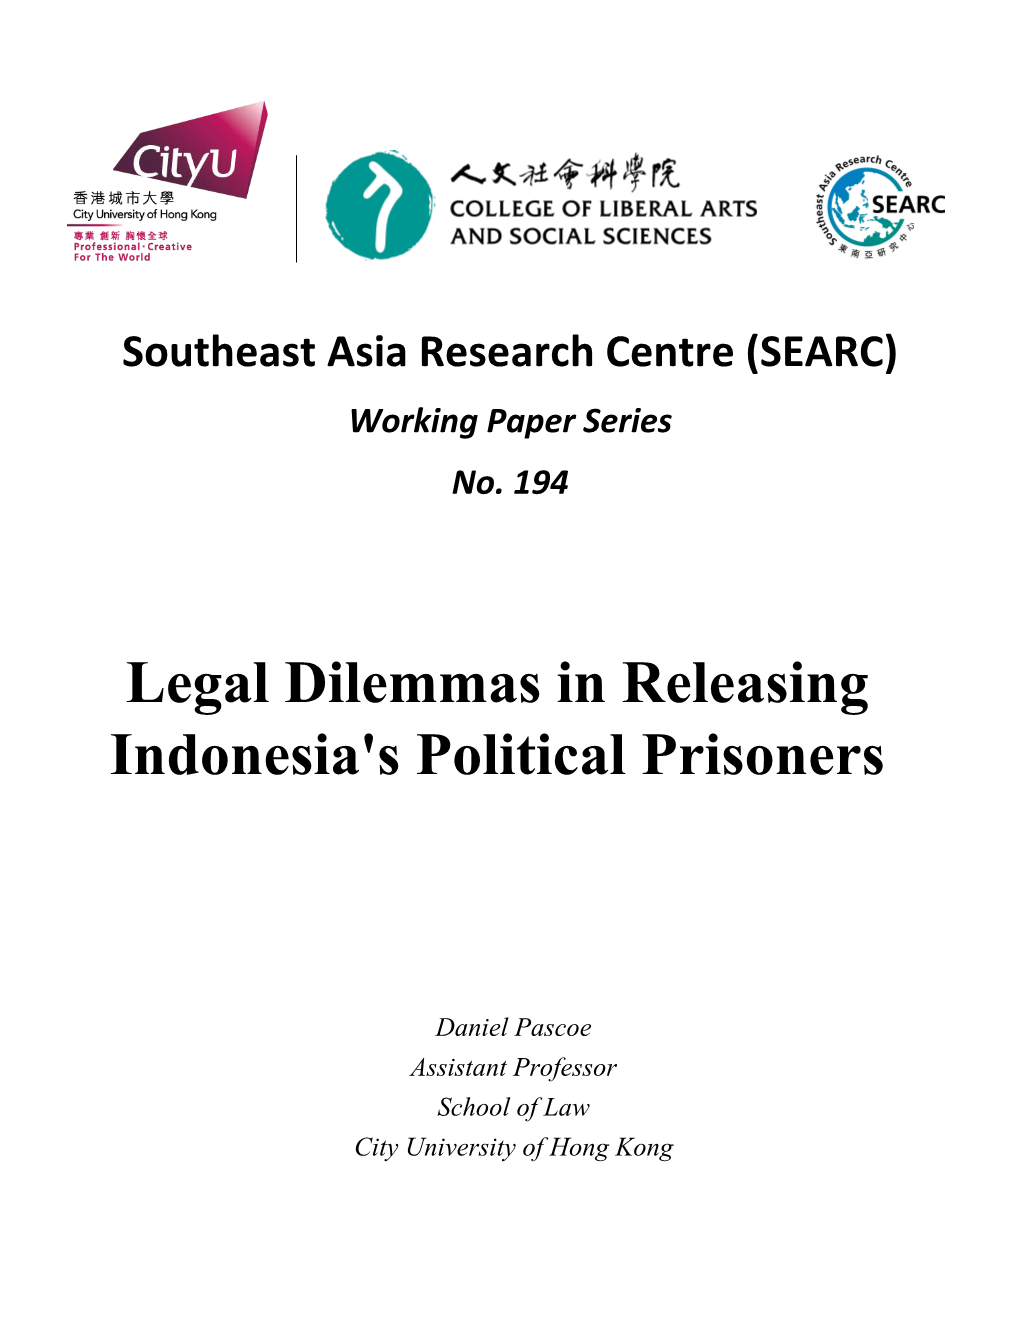 Legal Dilemmas in Releasing Indonesia's Political Prisoners